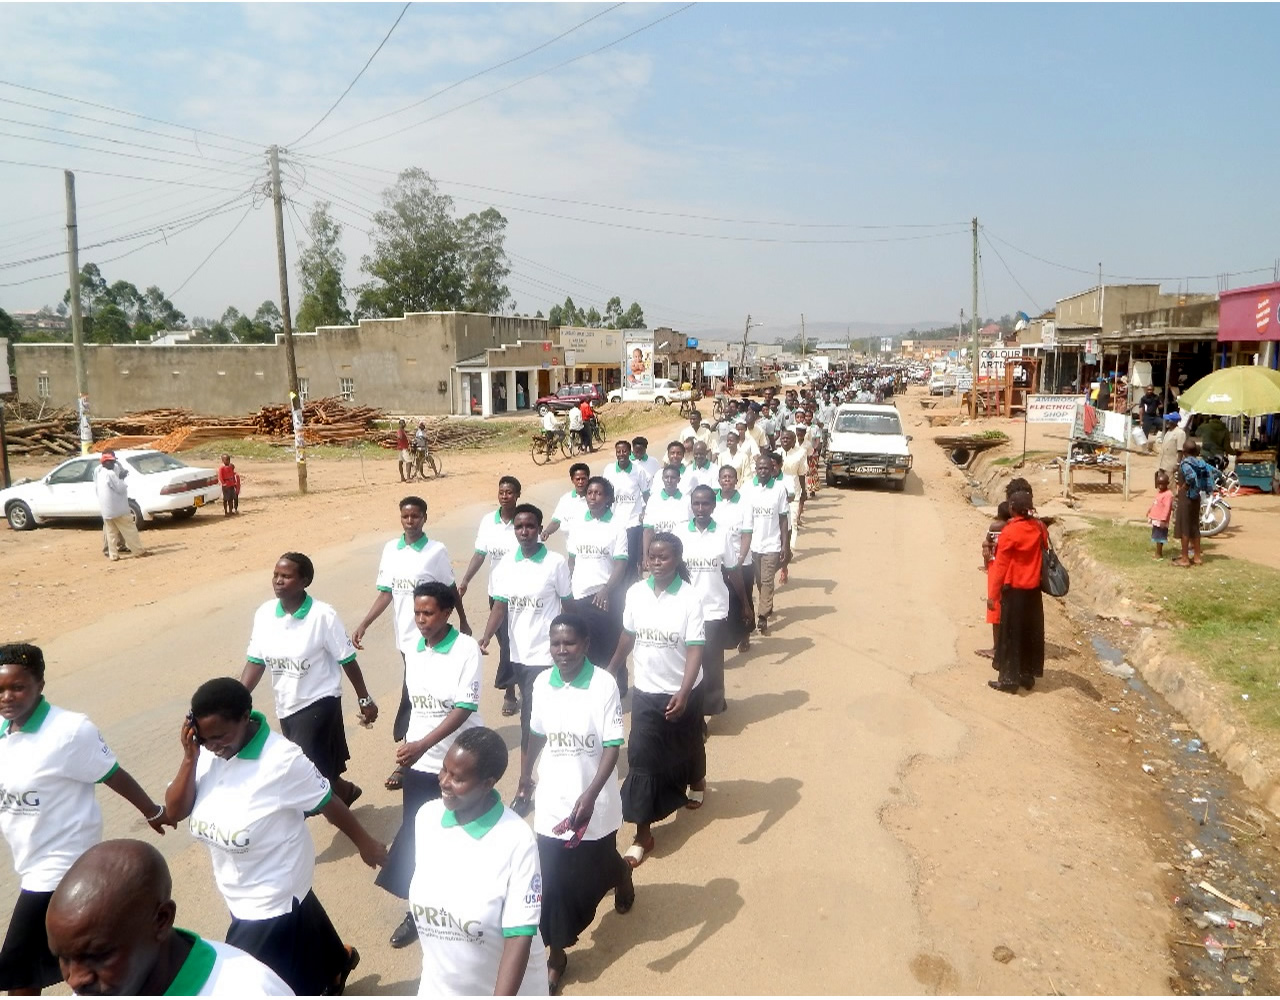 Participants marching in the streets of Kisoro during the breastfeeding commemoration day.